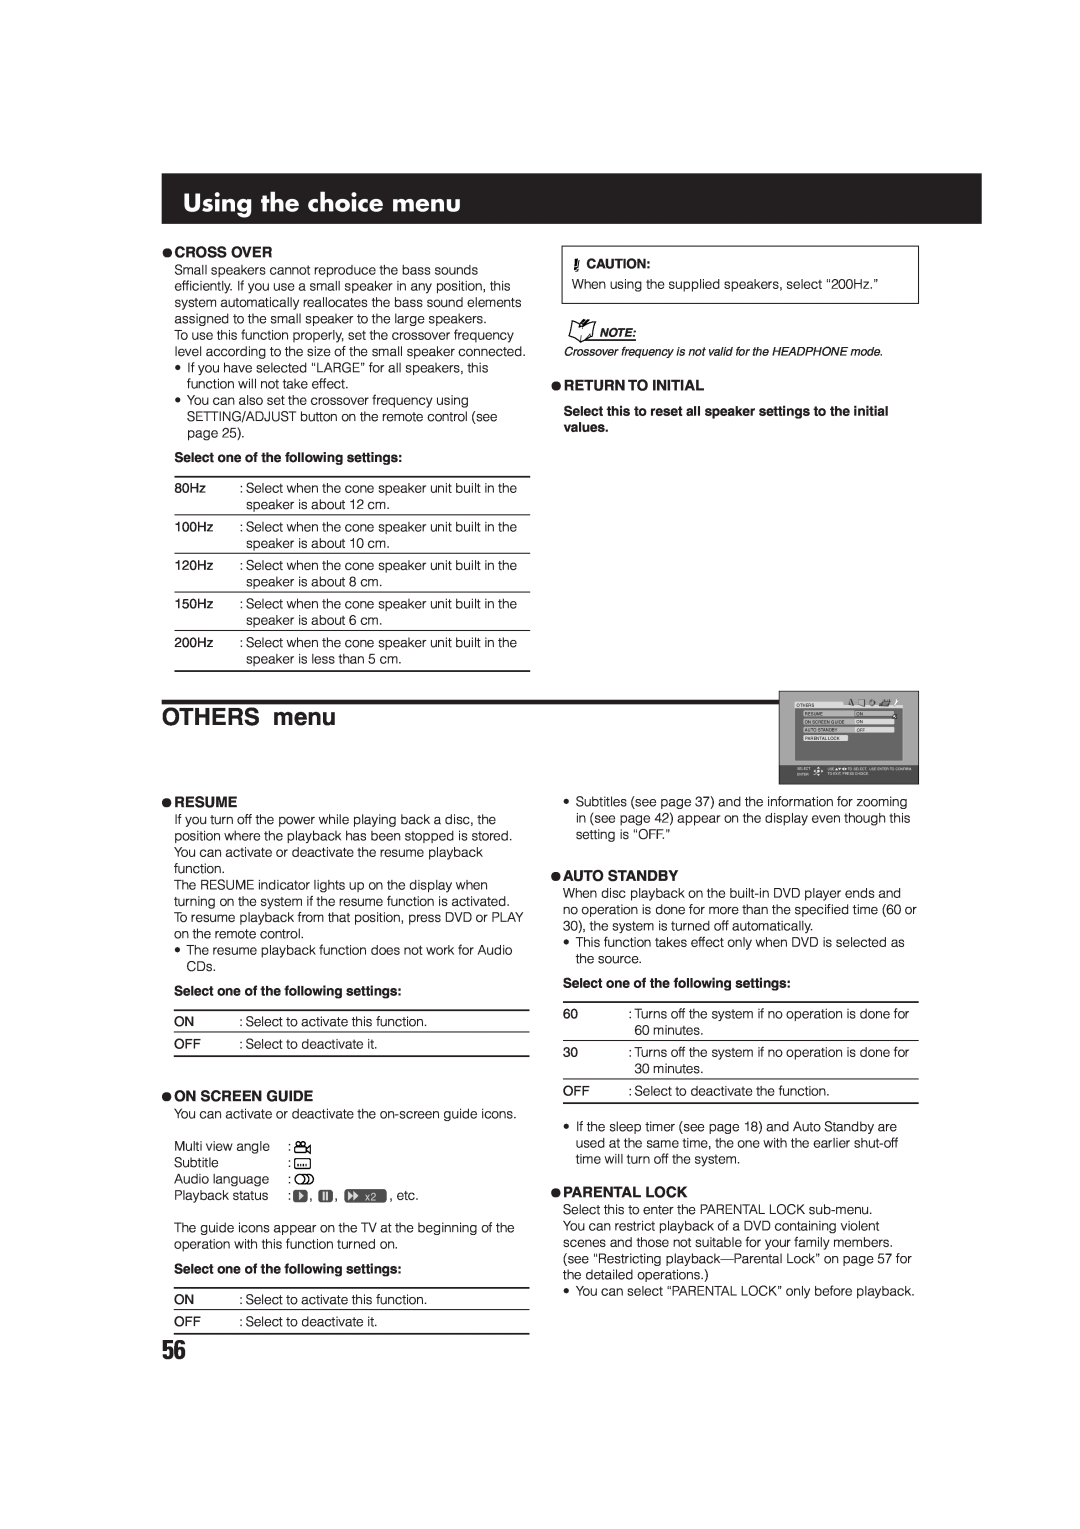 JVC TH-A75 OTHERS menu, Using the choice menu, ¶Cross Over, ¶Return To Initial, ¶Resume, ¶On Screen Guide, ¶Auto Standby 